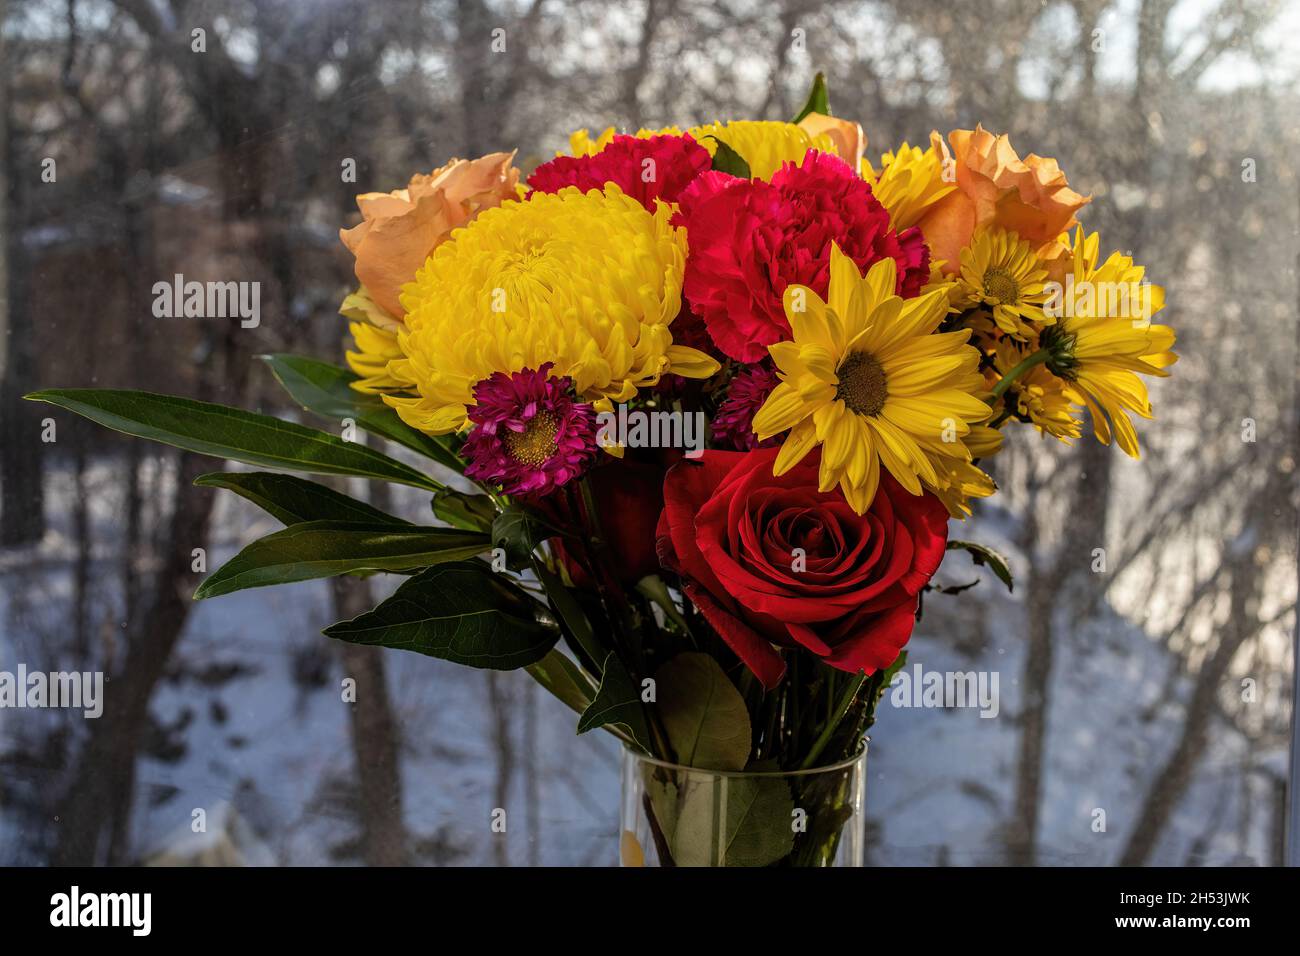 Beautiful flower arrangement in reds and yellow against a snowy background. Stock Photo